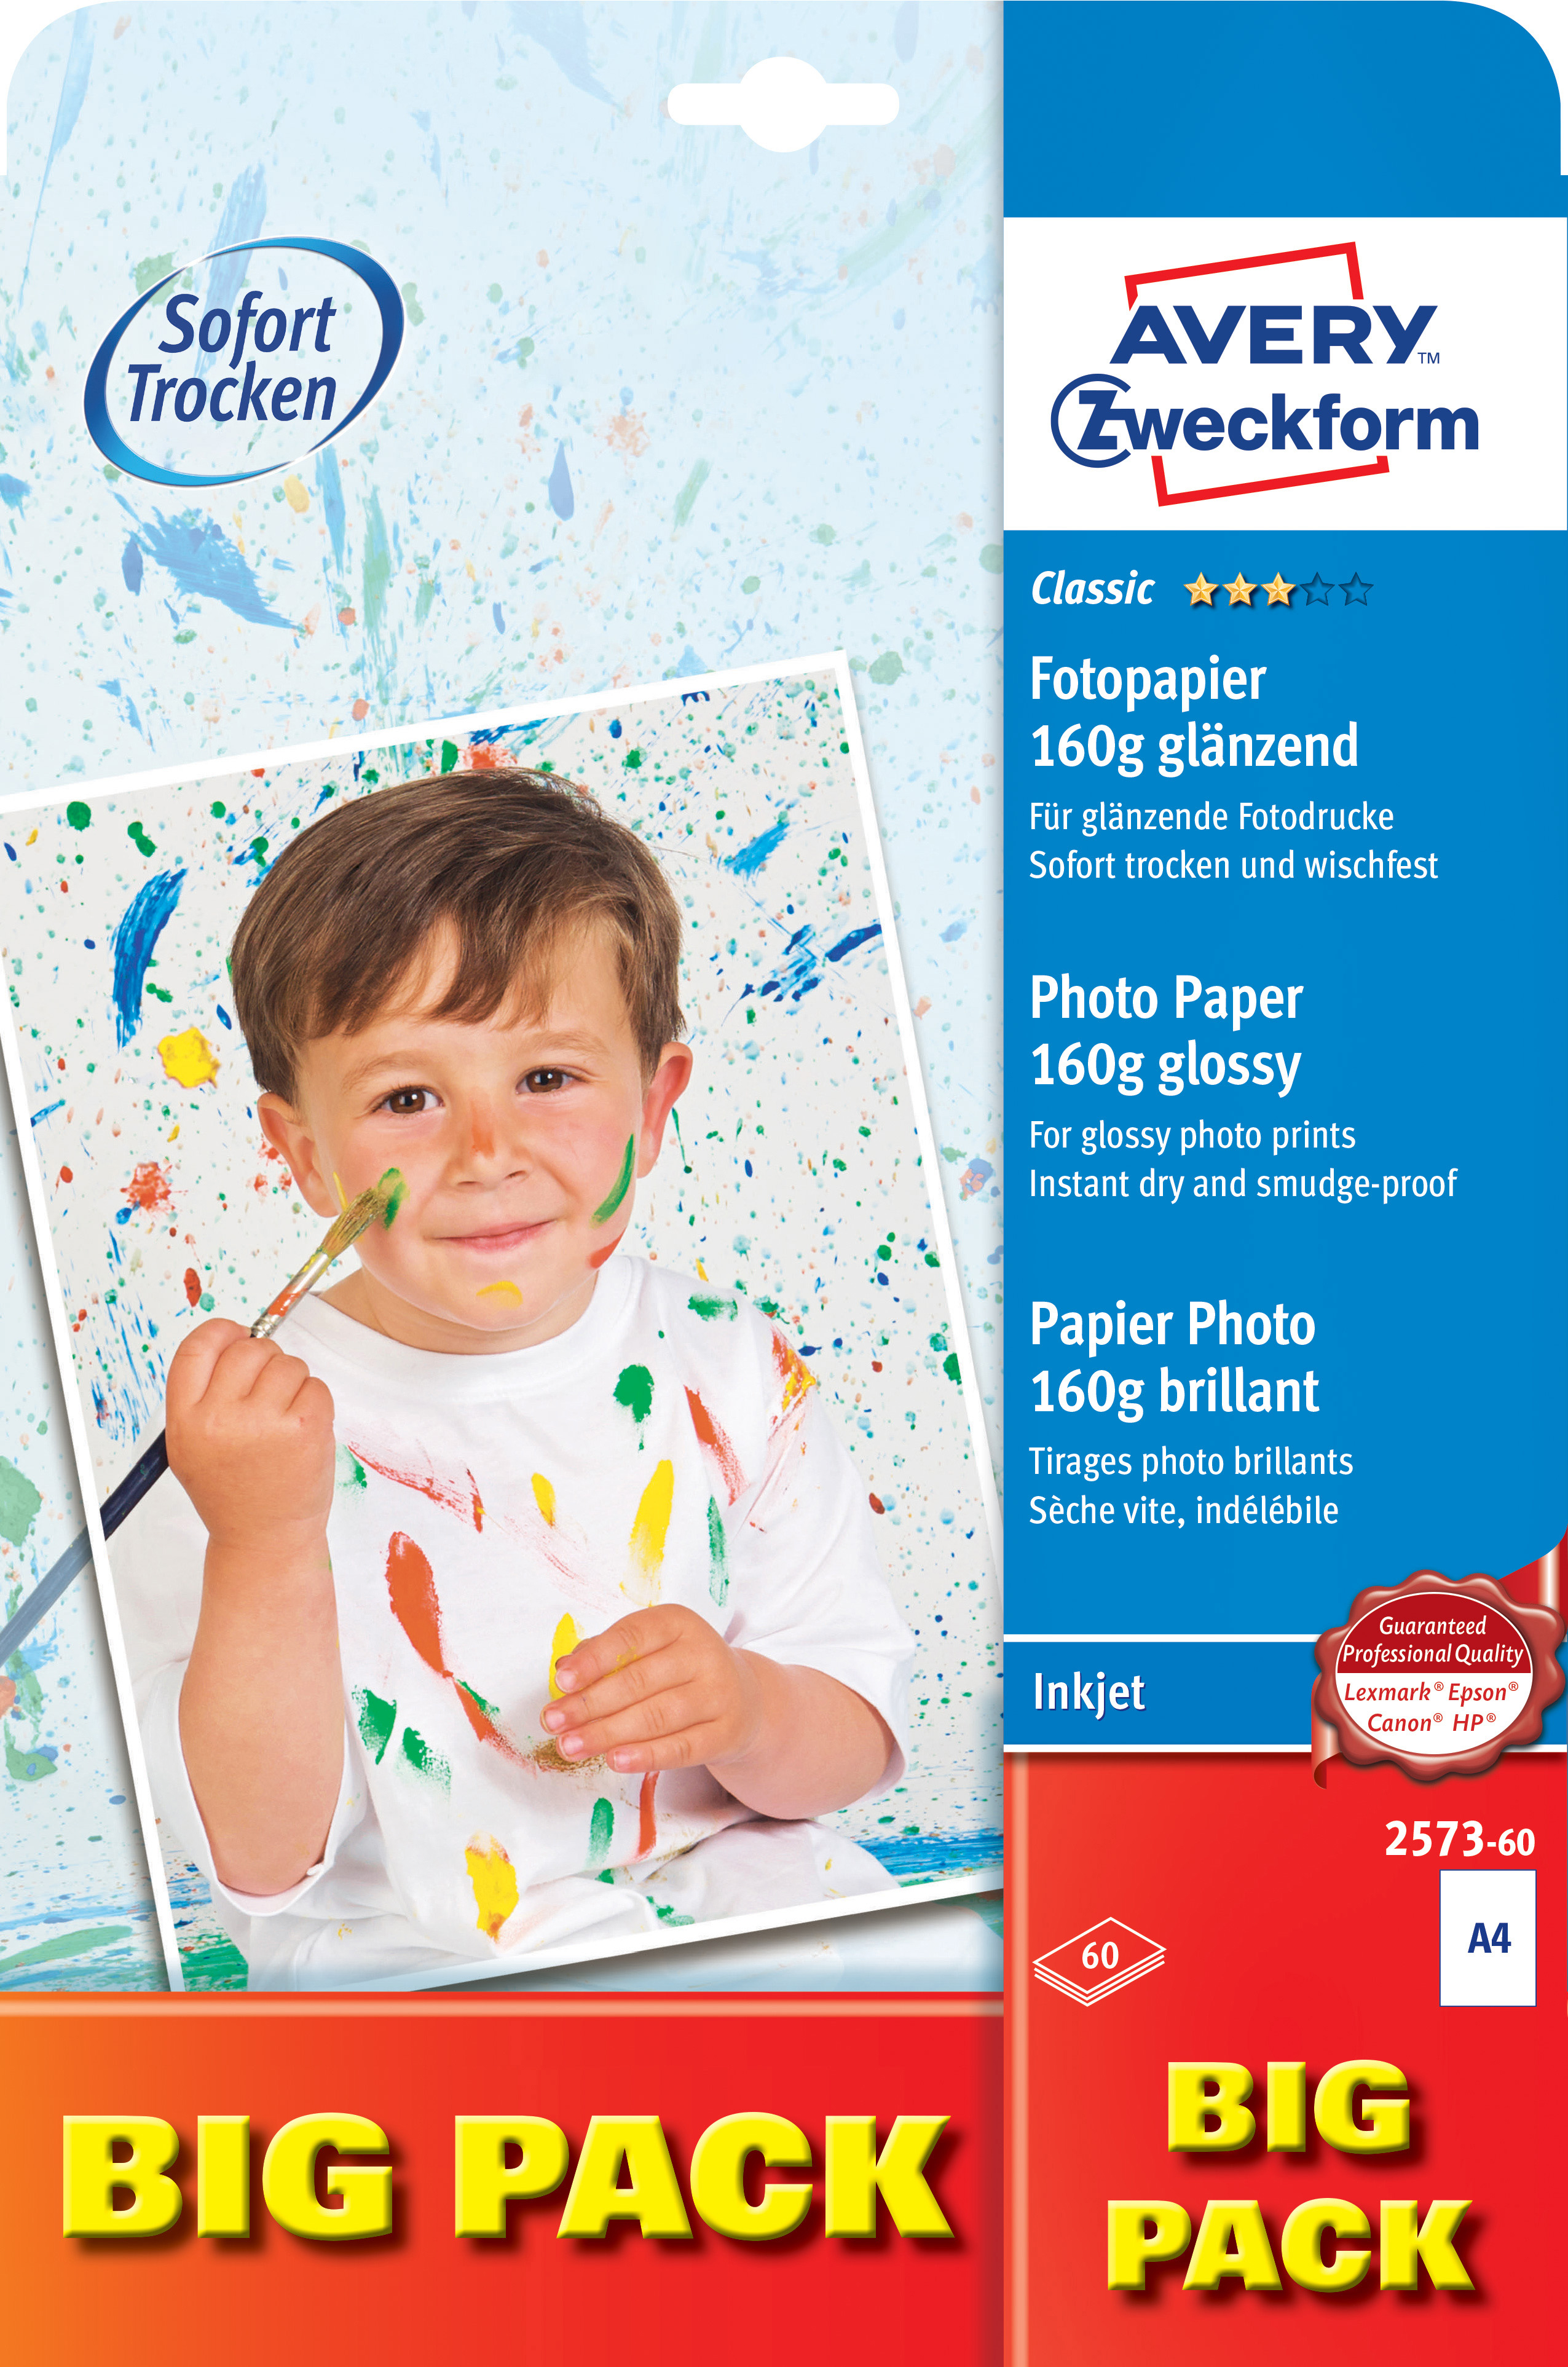 AVERY ZWECKFORM InkJet Photo Paper A4 2573-60 160g,glossy, blanc 60 feuilles 160g,glossy, blanc 60 f